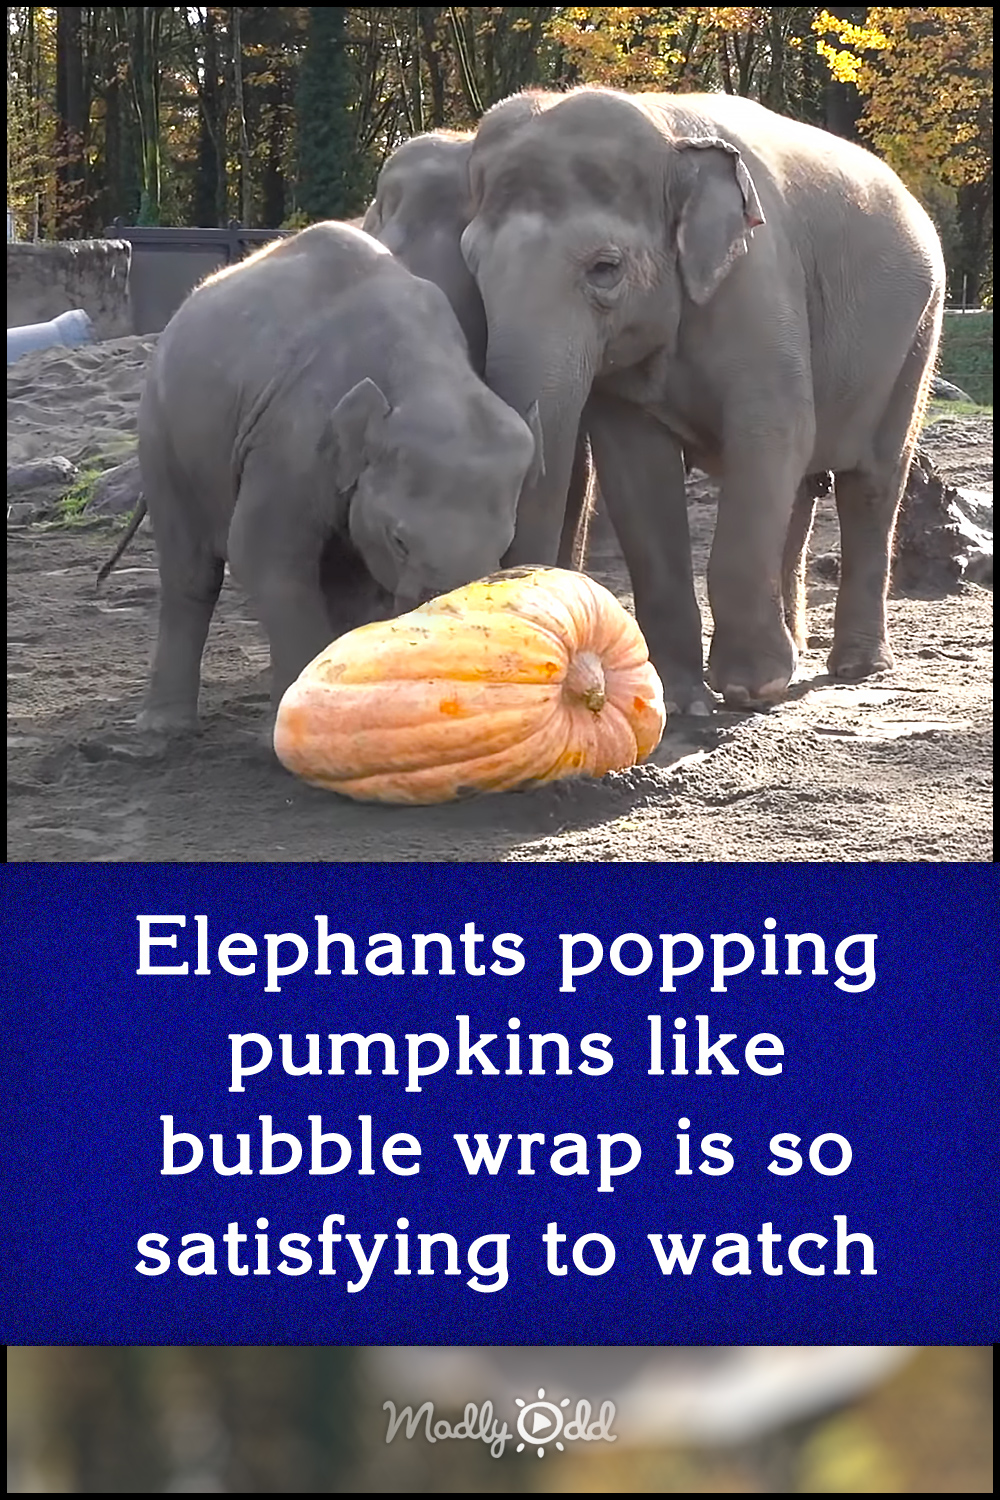 Elephants popping pumpkins like bubble wrap is so satisfying to watch